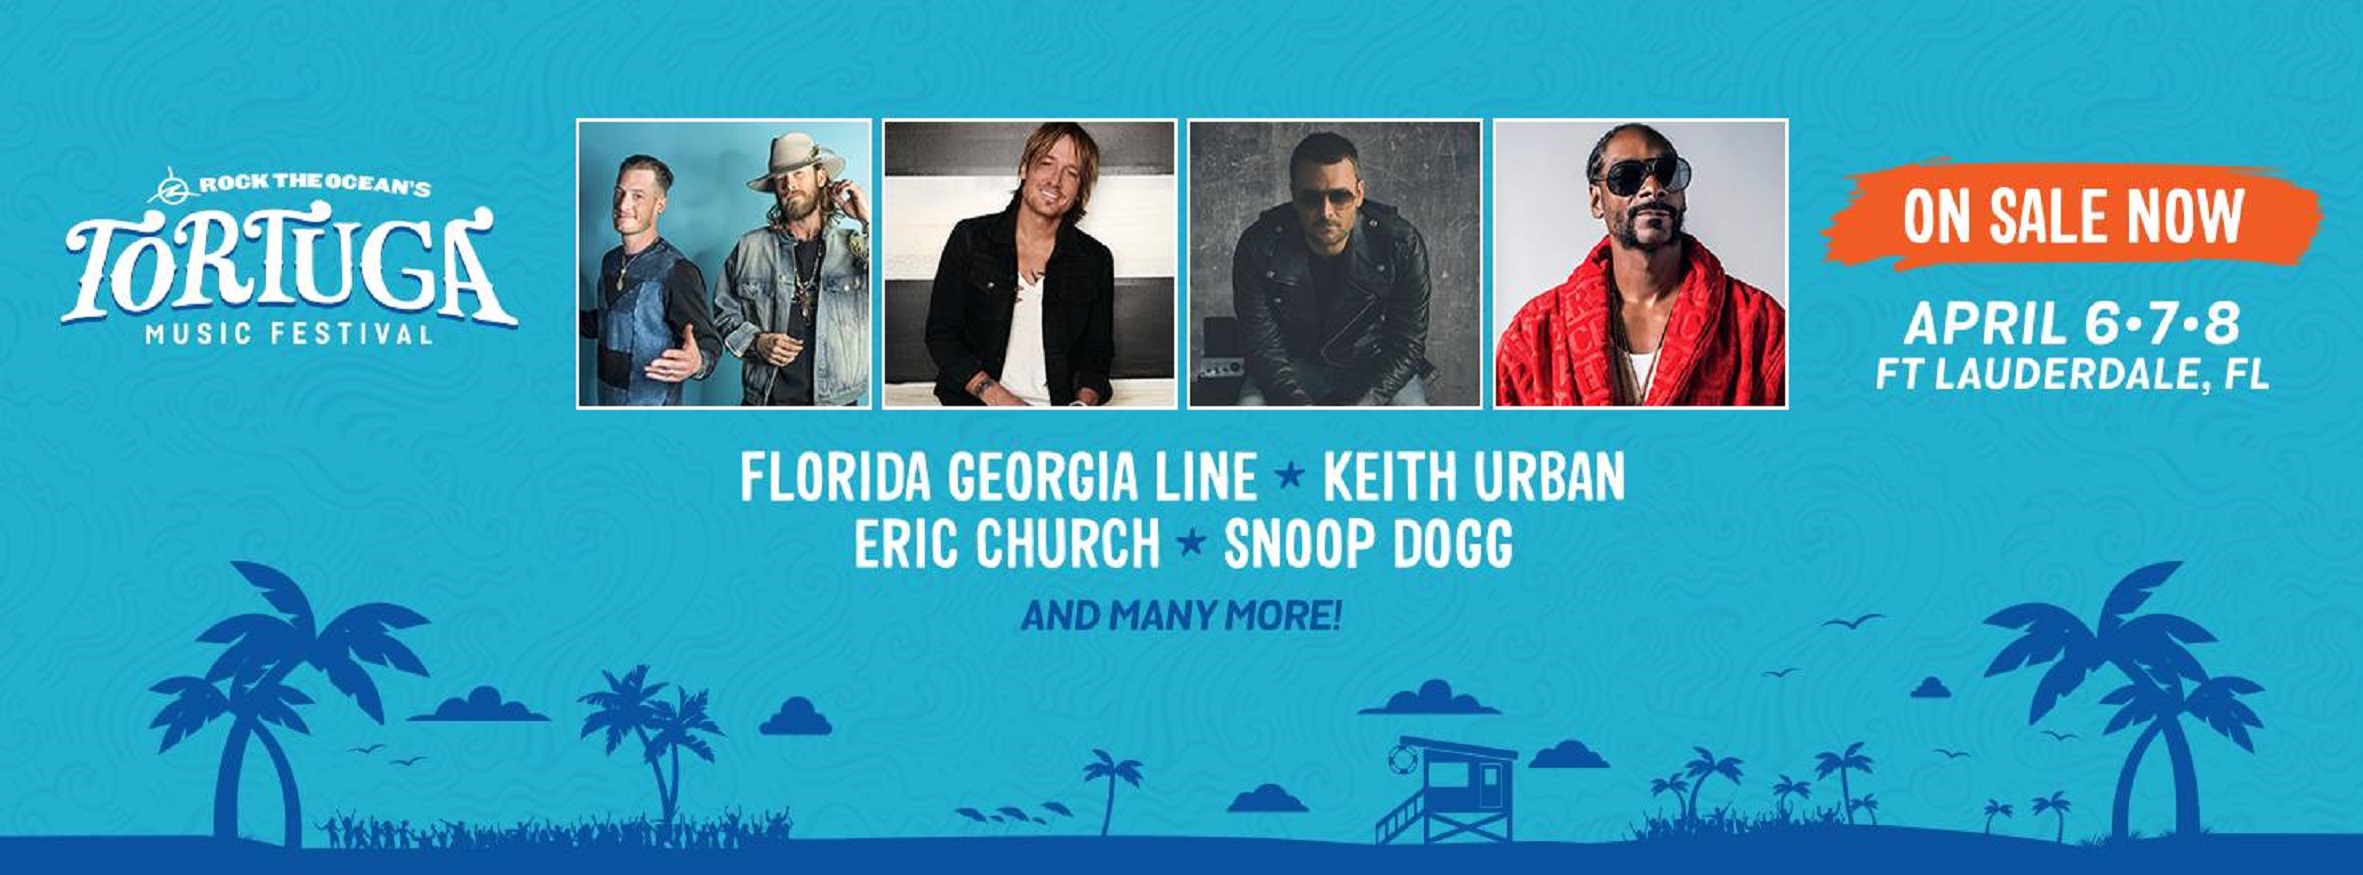 Tortuga Music Festival Early Bird Tickets Available Now